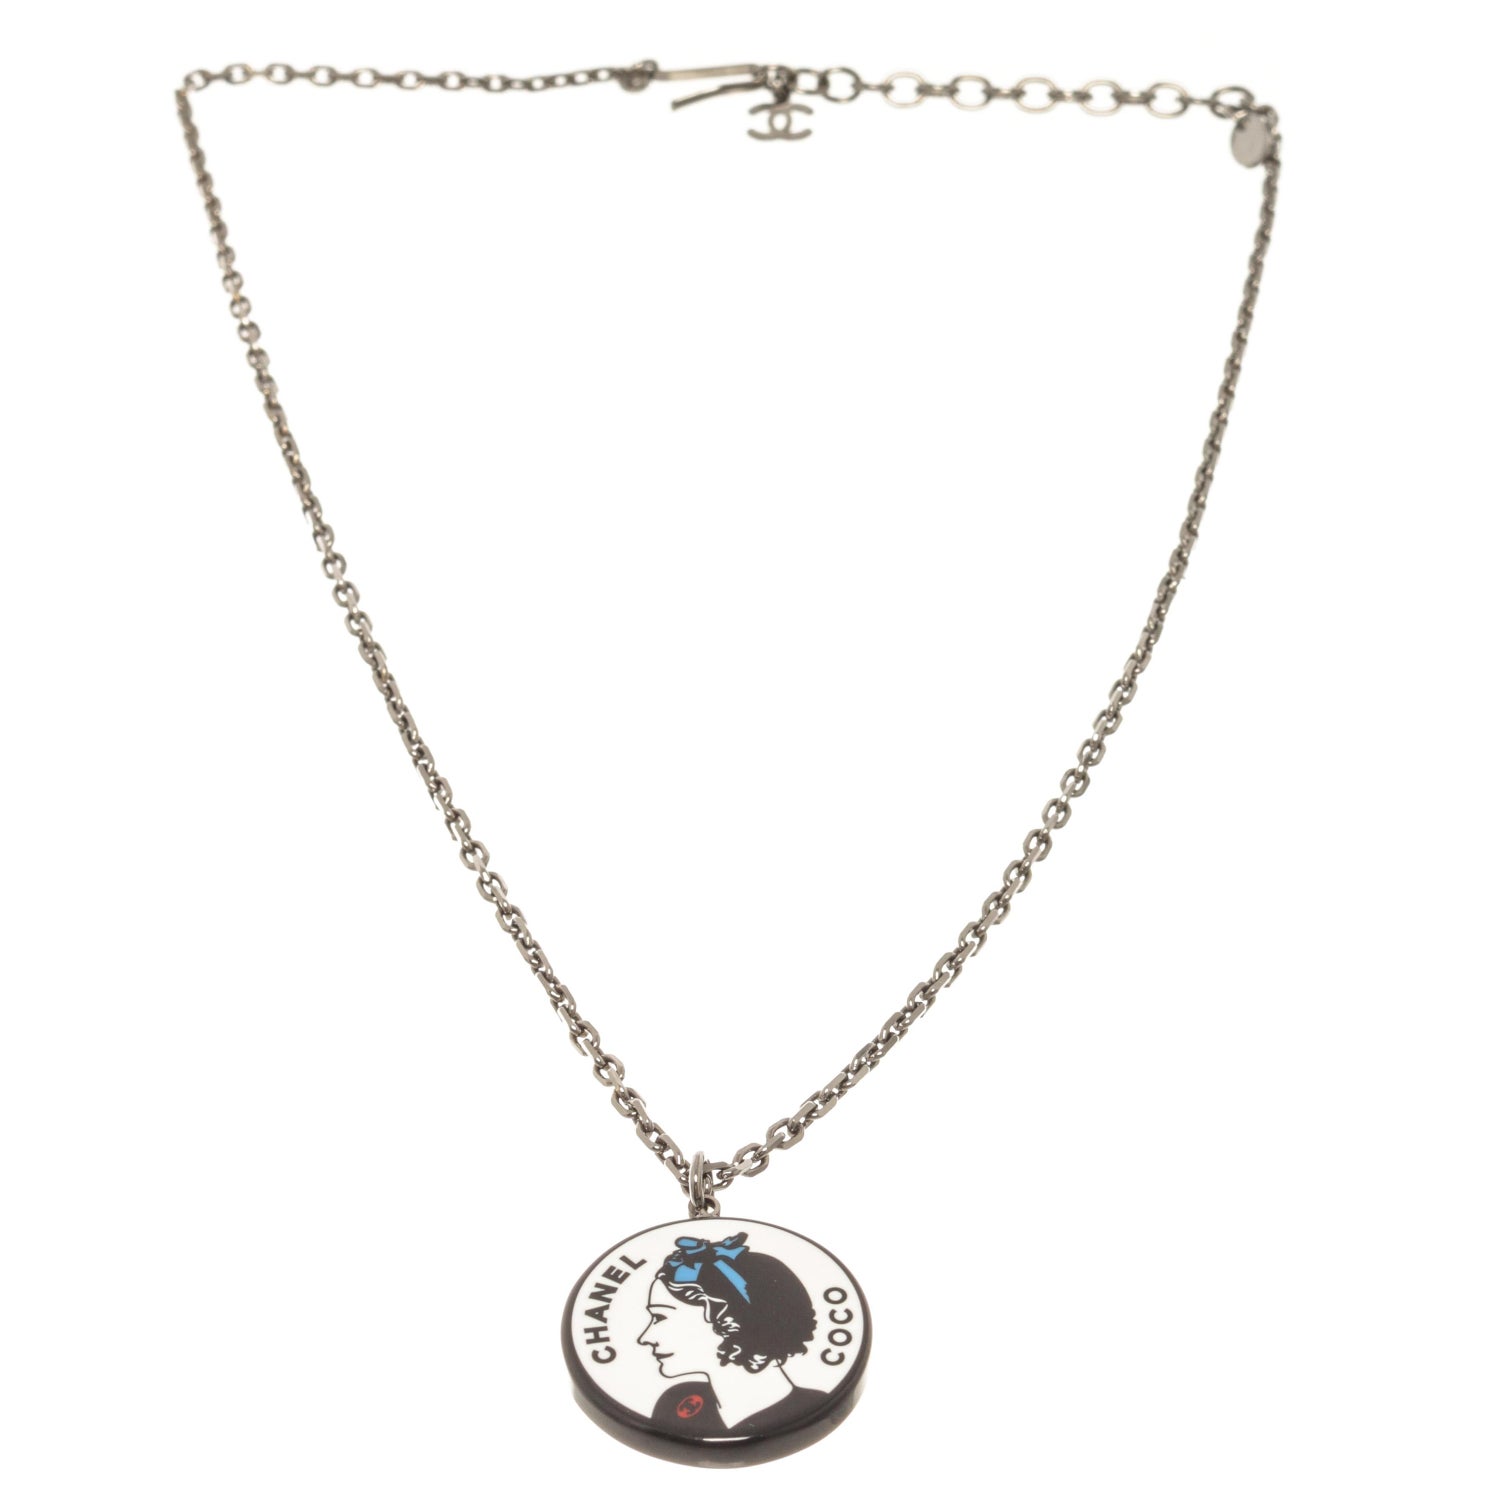 Chanel Silver Mademoiselle Necklace